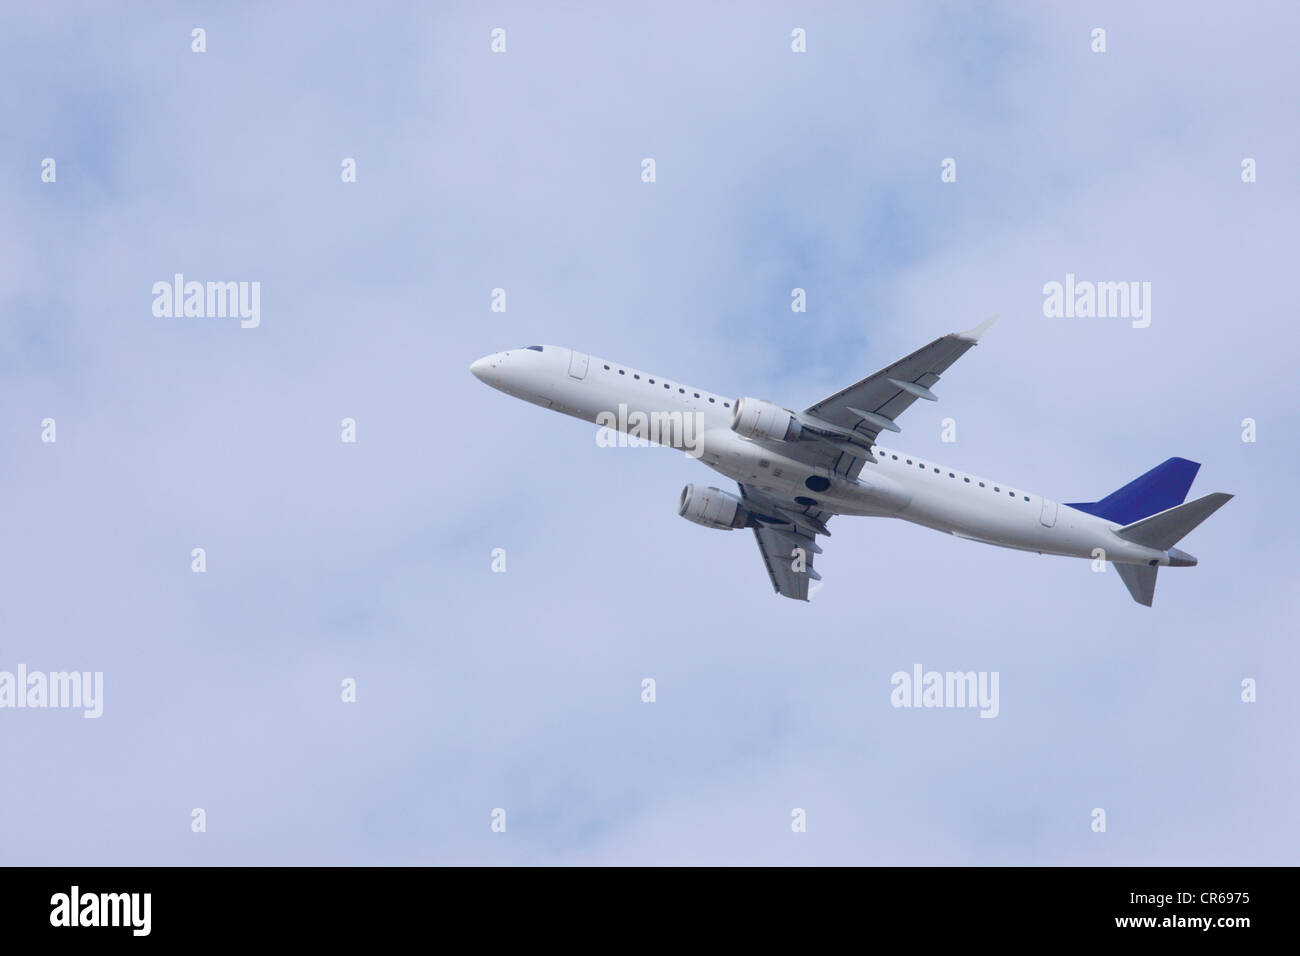 Europe, Germany, Bavaria, Commercial passenger plane after take off at Munich airport Stock Photo